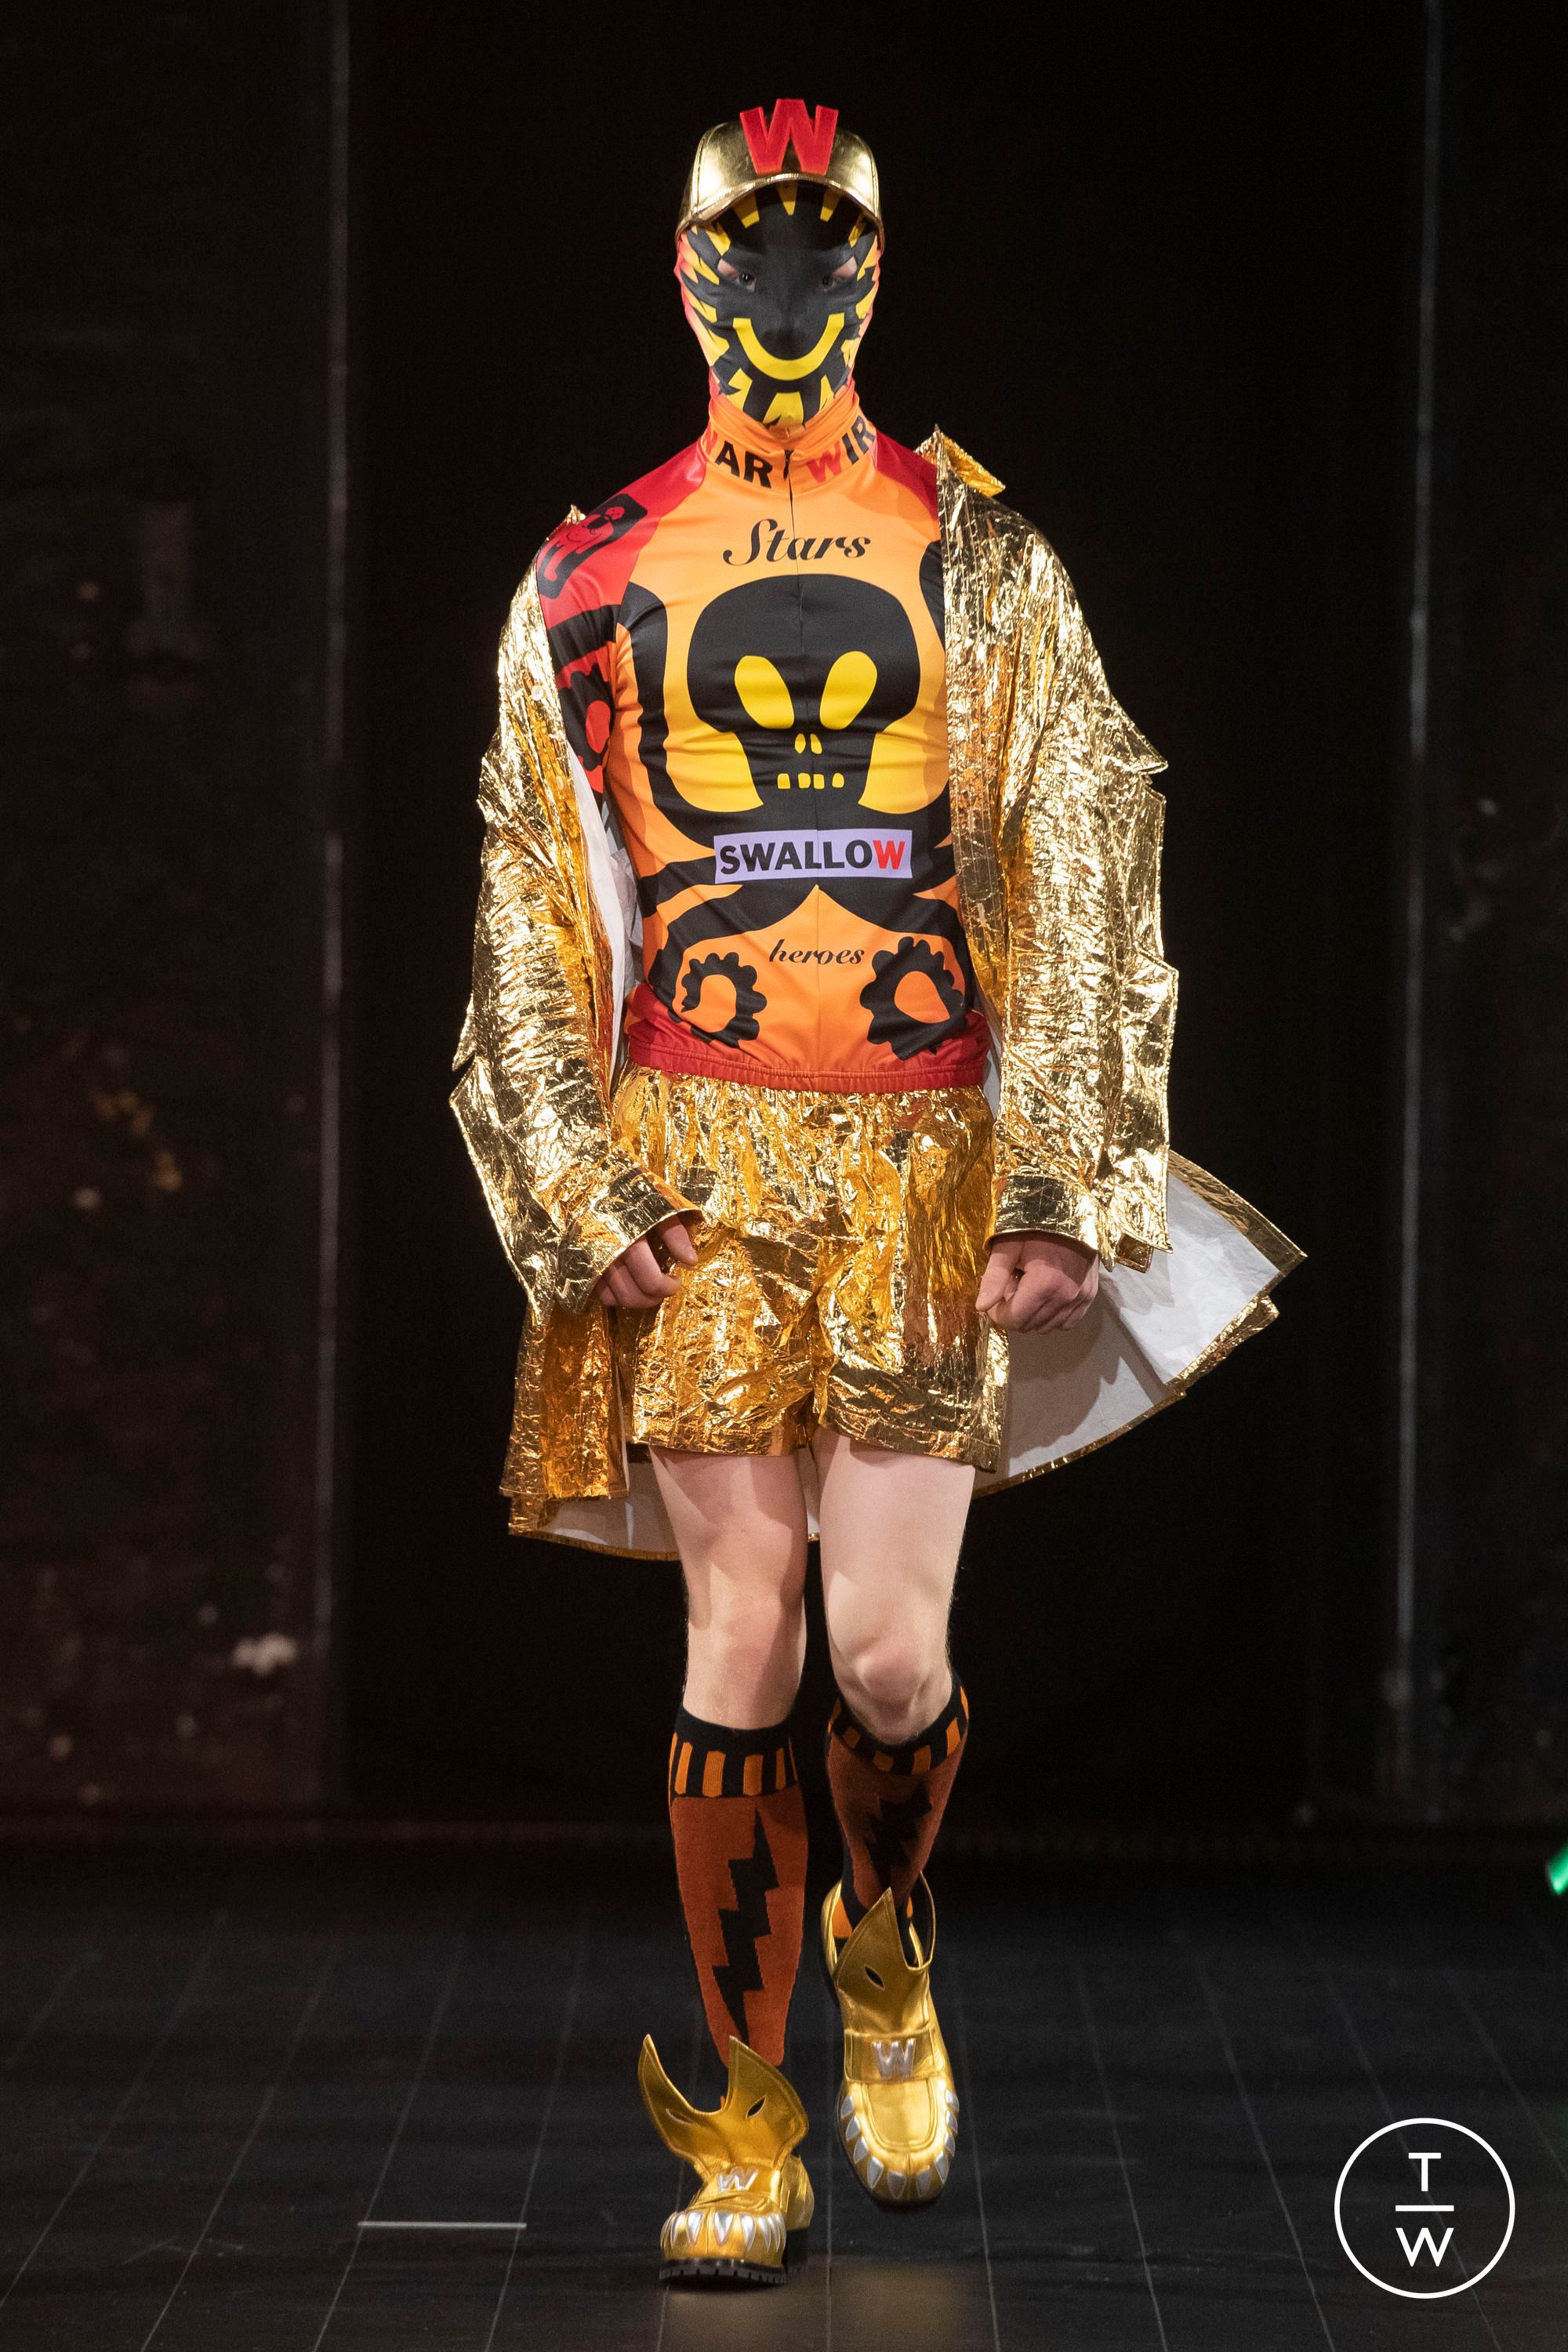 Walter Van Beirendonck News, Collections, Fashion Shows, Fashion Week  Reviews, and More